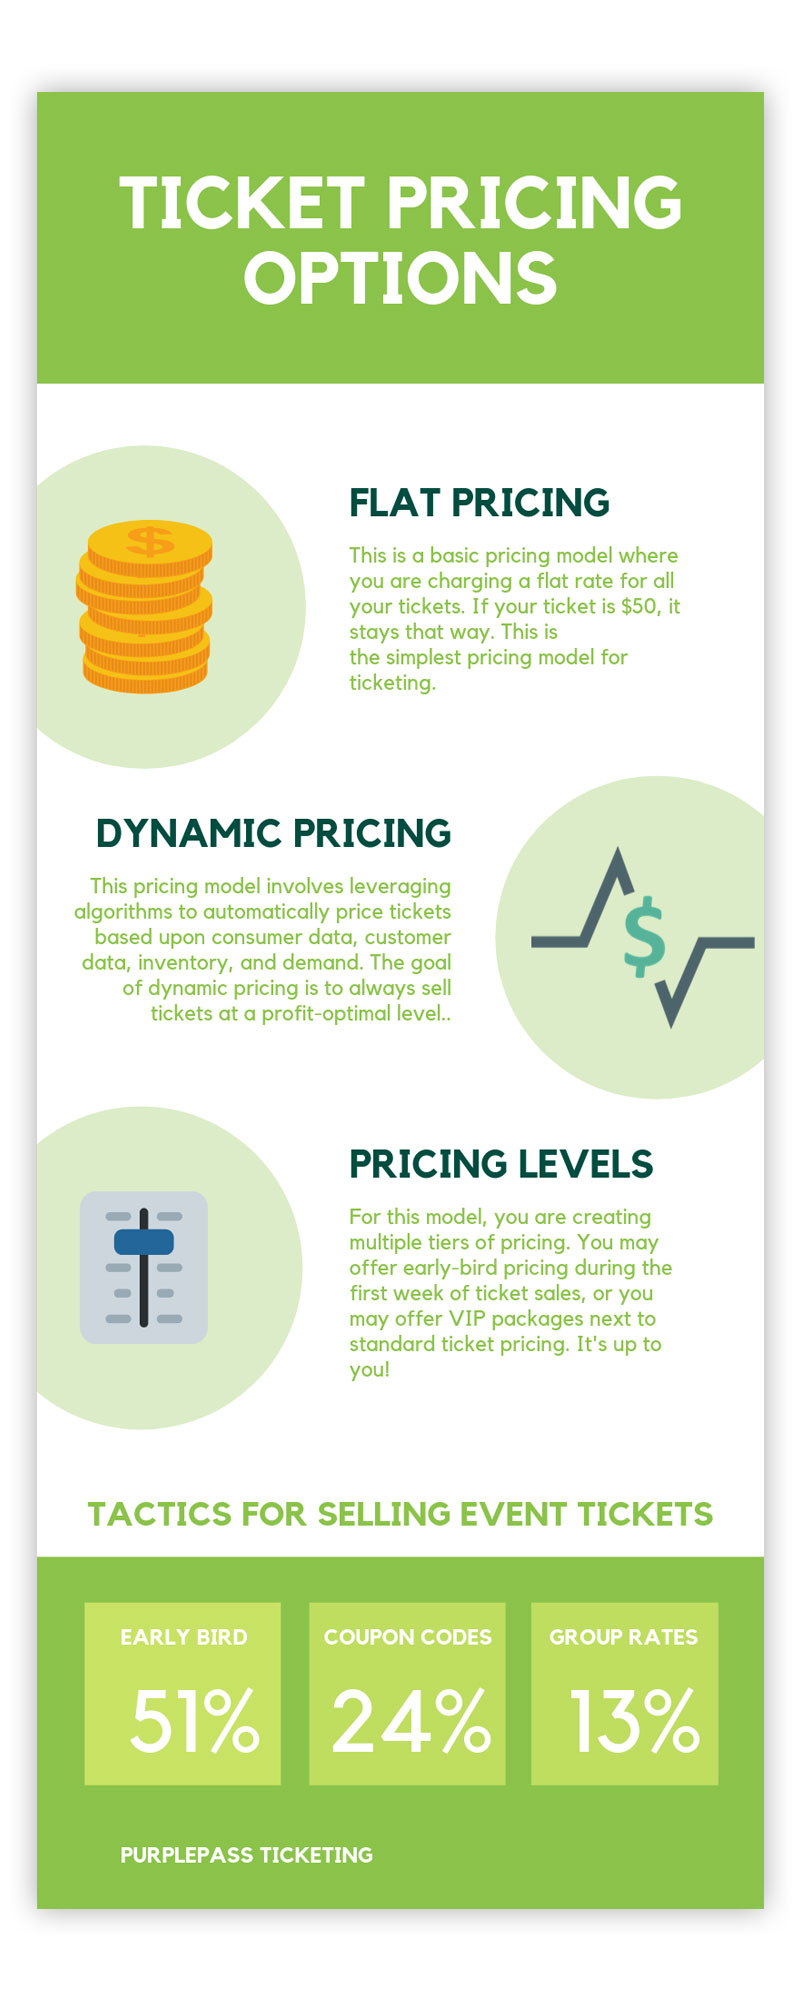 infographic for ticketing options and pricing